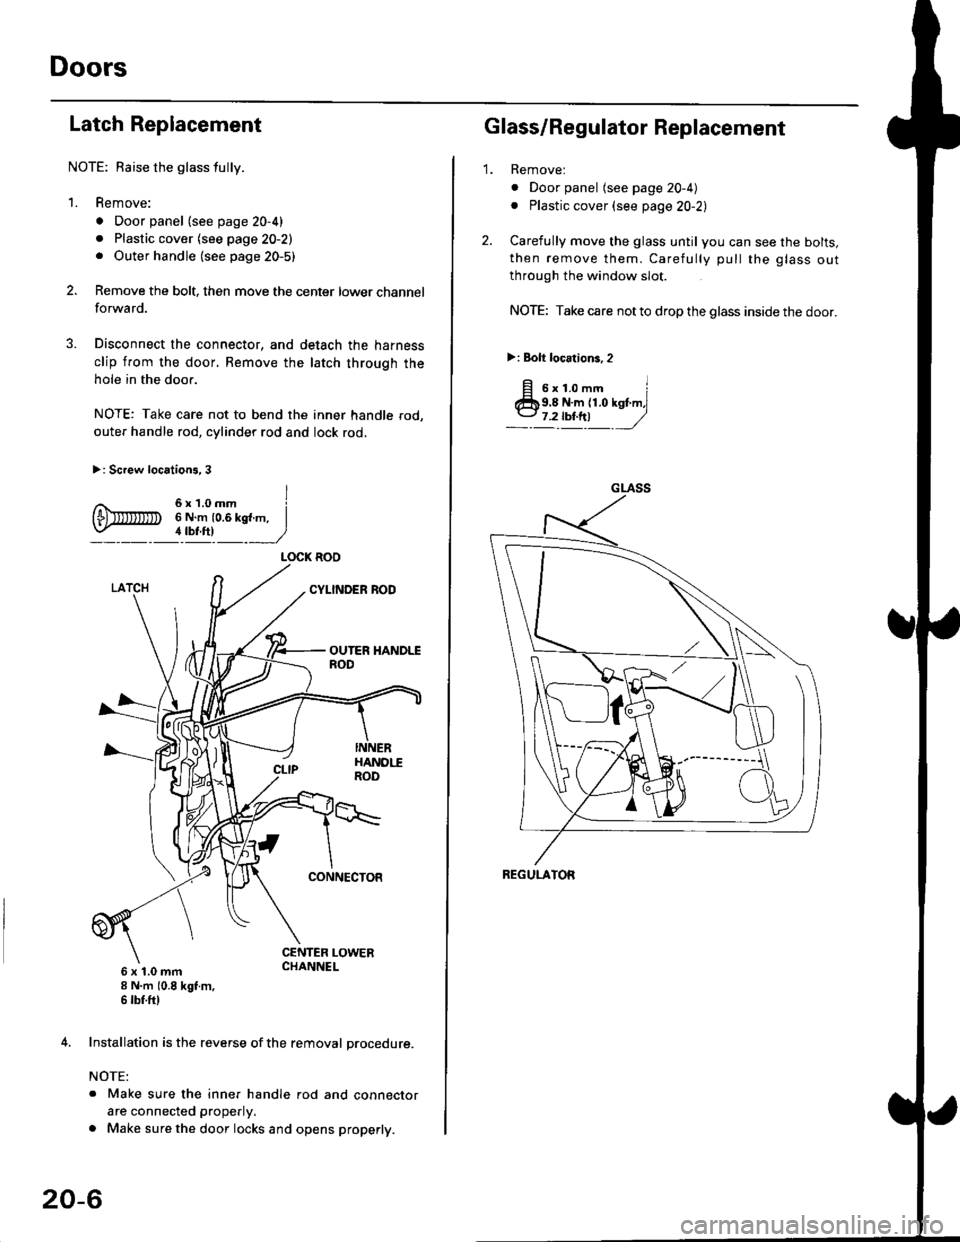 HONDA CIVIC 1999 6.G Workshop Manual Doors
Latch Replacement
NOTE: Baise the glass fully.
1. Remove:
. Door panel (see page 20-4)
. Plastic cover (see page 20-2). Outer handle (see page 20-5)
Remove the bolt, then move the center lower c